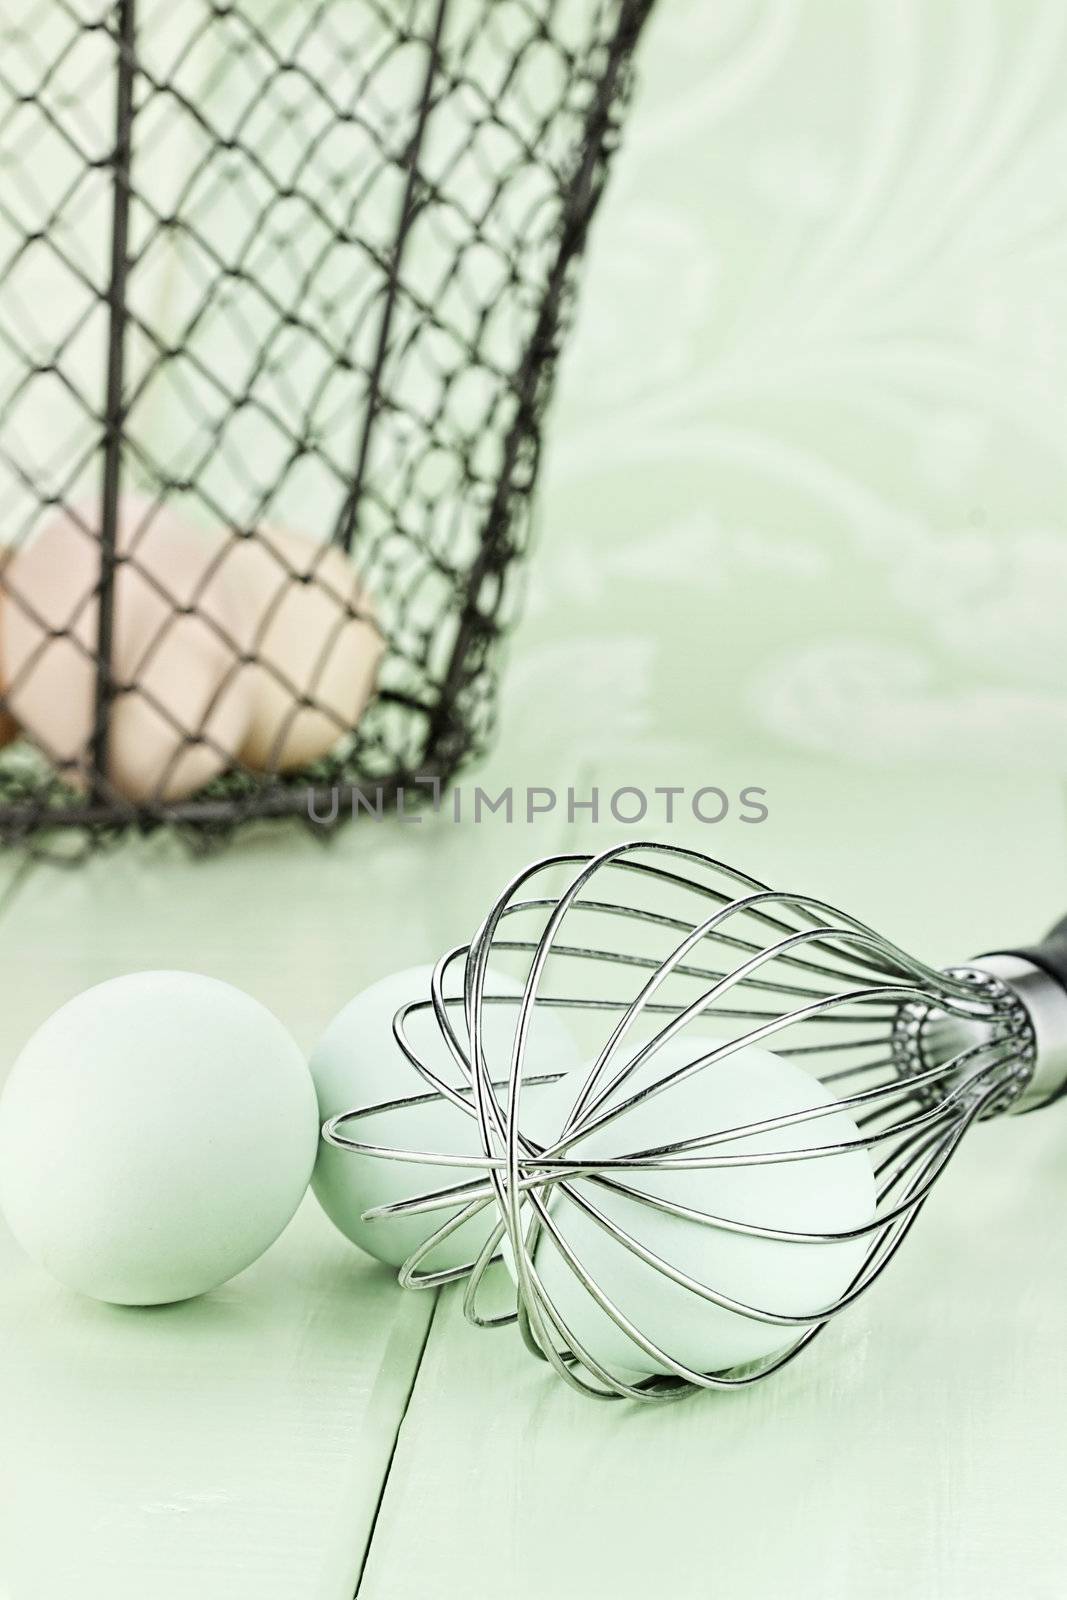 Fresh free range Ameraucana eggs in a whisk with brown eggs in a vintage basket in background. 
